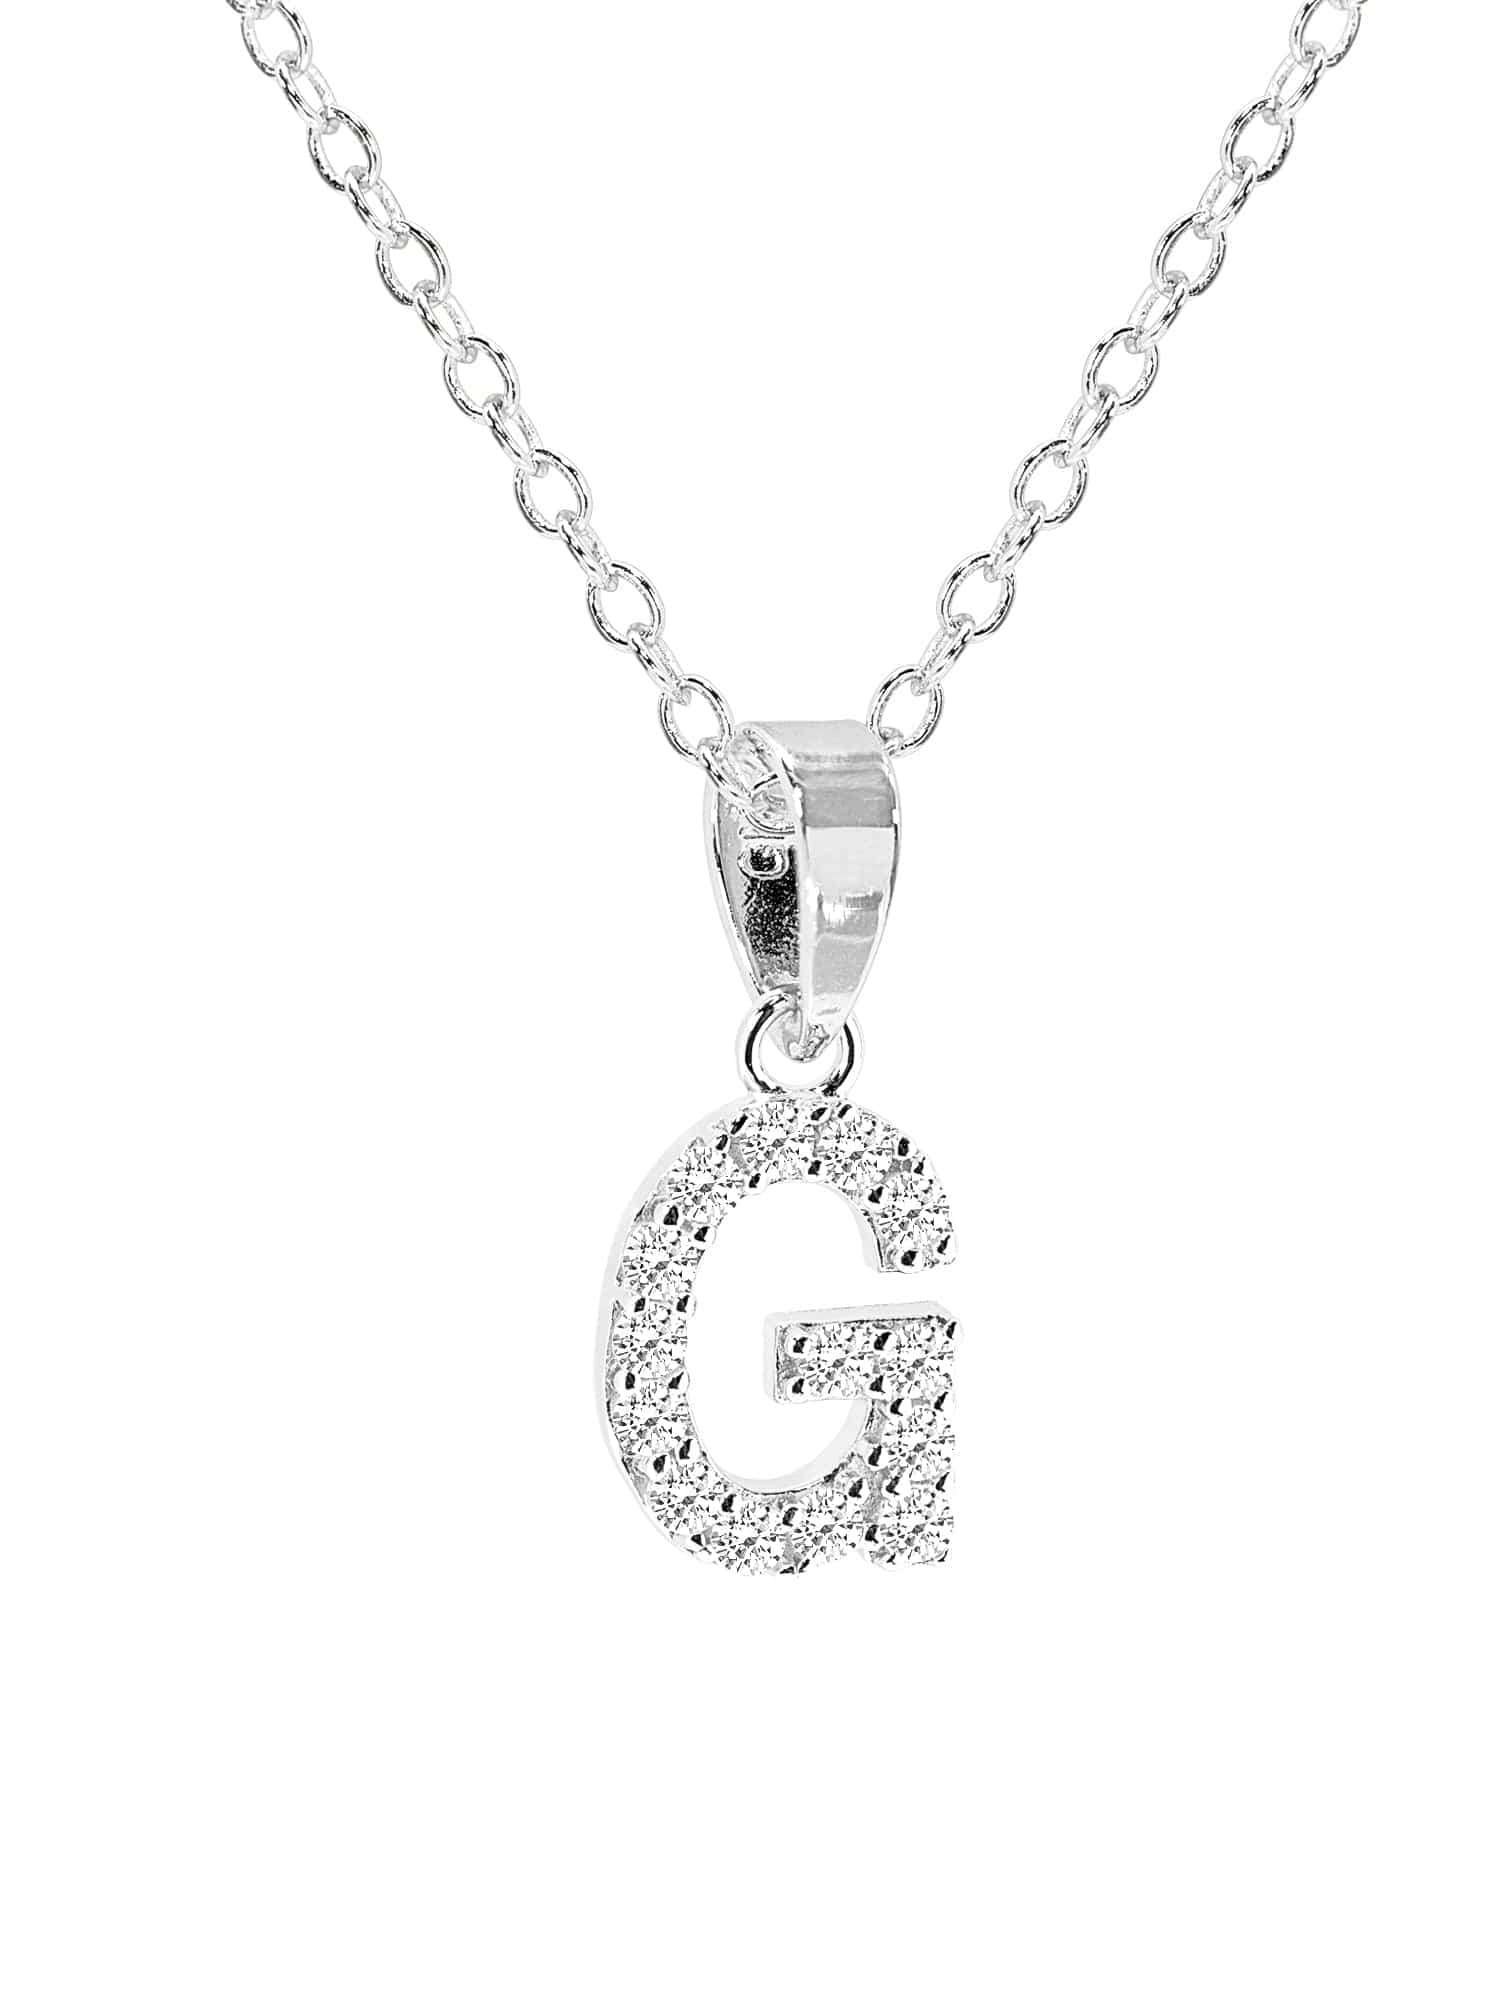 Sterling Silver Initial Necklace & Stud Earrings Set with CZ accent